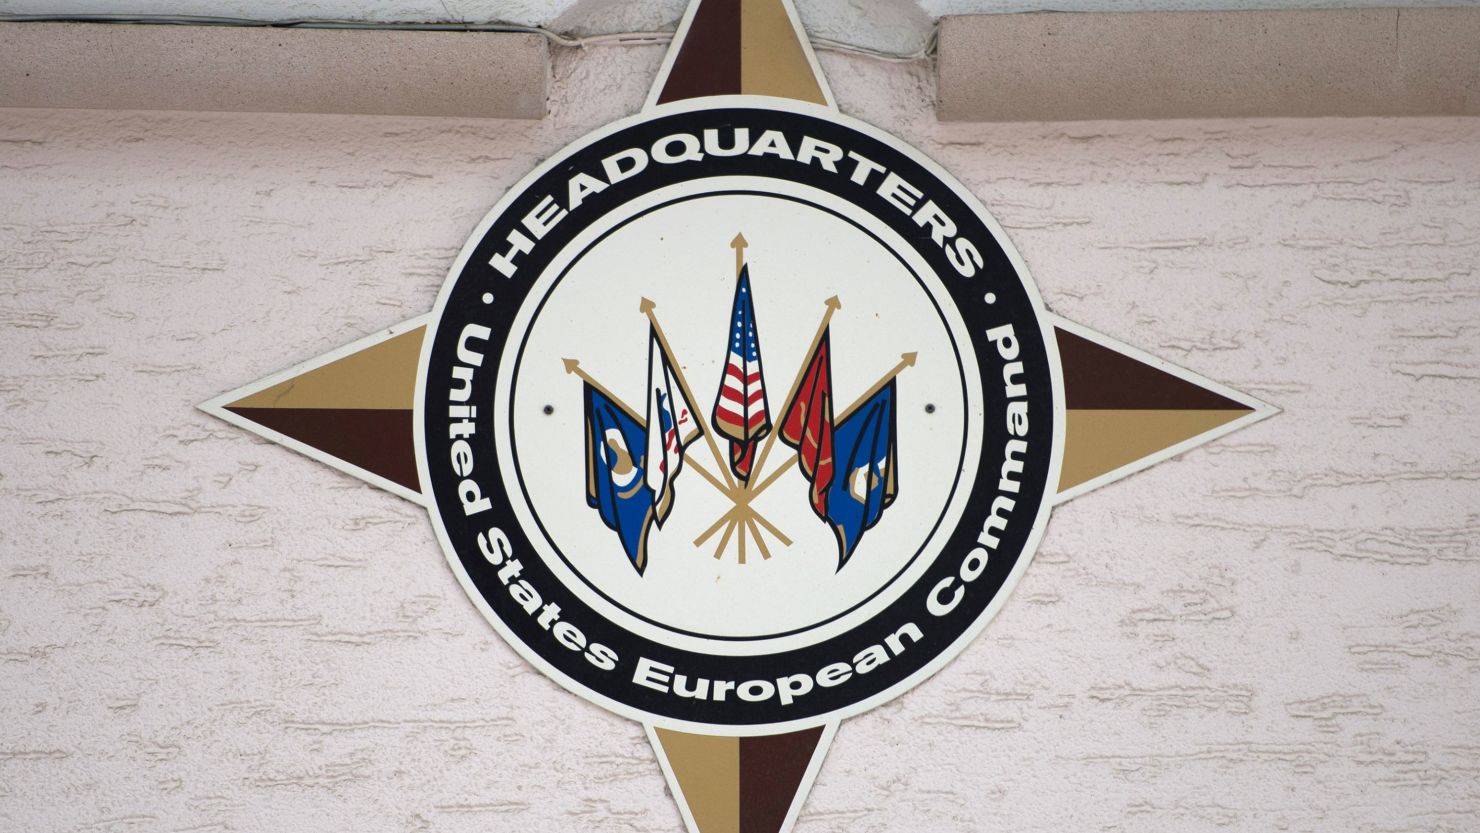 The logo of the United States European Command (EUCOM) is seen at the headquarters on May 3, 2016 at the Patch Barracks in Stuttgart, southern Germany. - A ceremony took place at the barracks as US General Curtis Scaparrotti was introduced as Commander of the US European Command, taking over from US General Philip Breedlove. (Photo by Marijan Murat / dpa / AFP) / Germany OUT (Photo by MARIJAN MURAT/dpa/AFP via Getty Images)